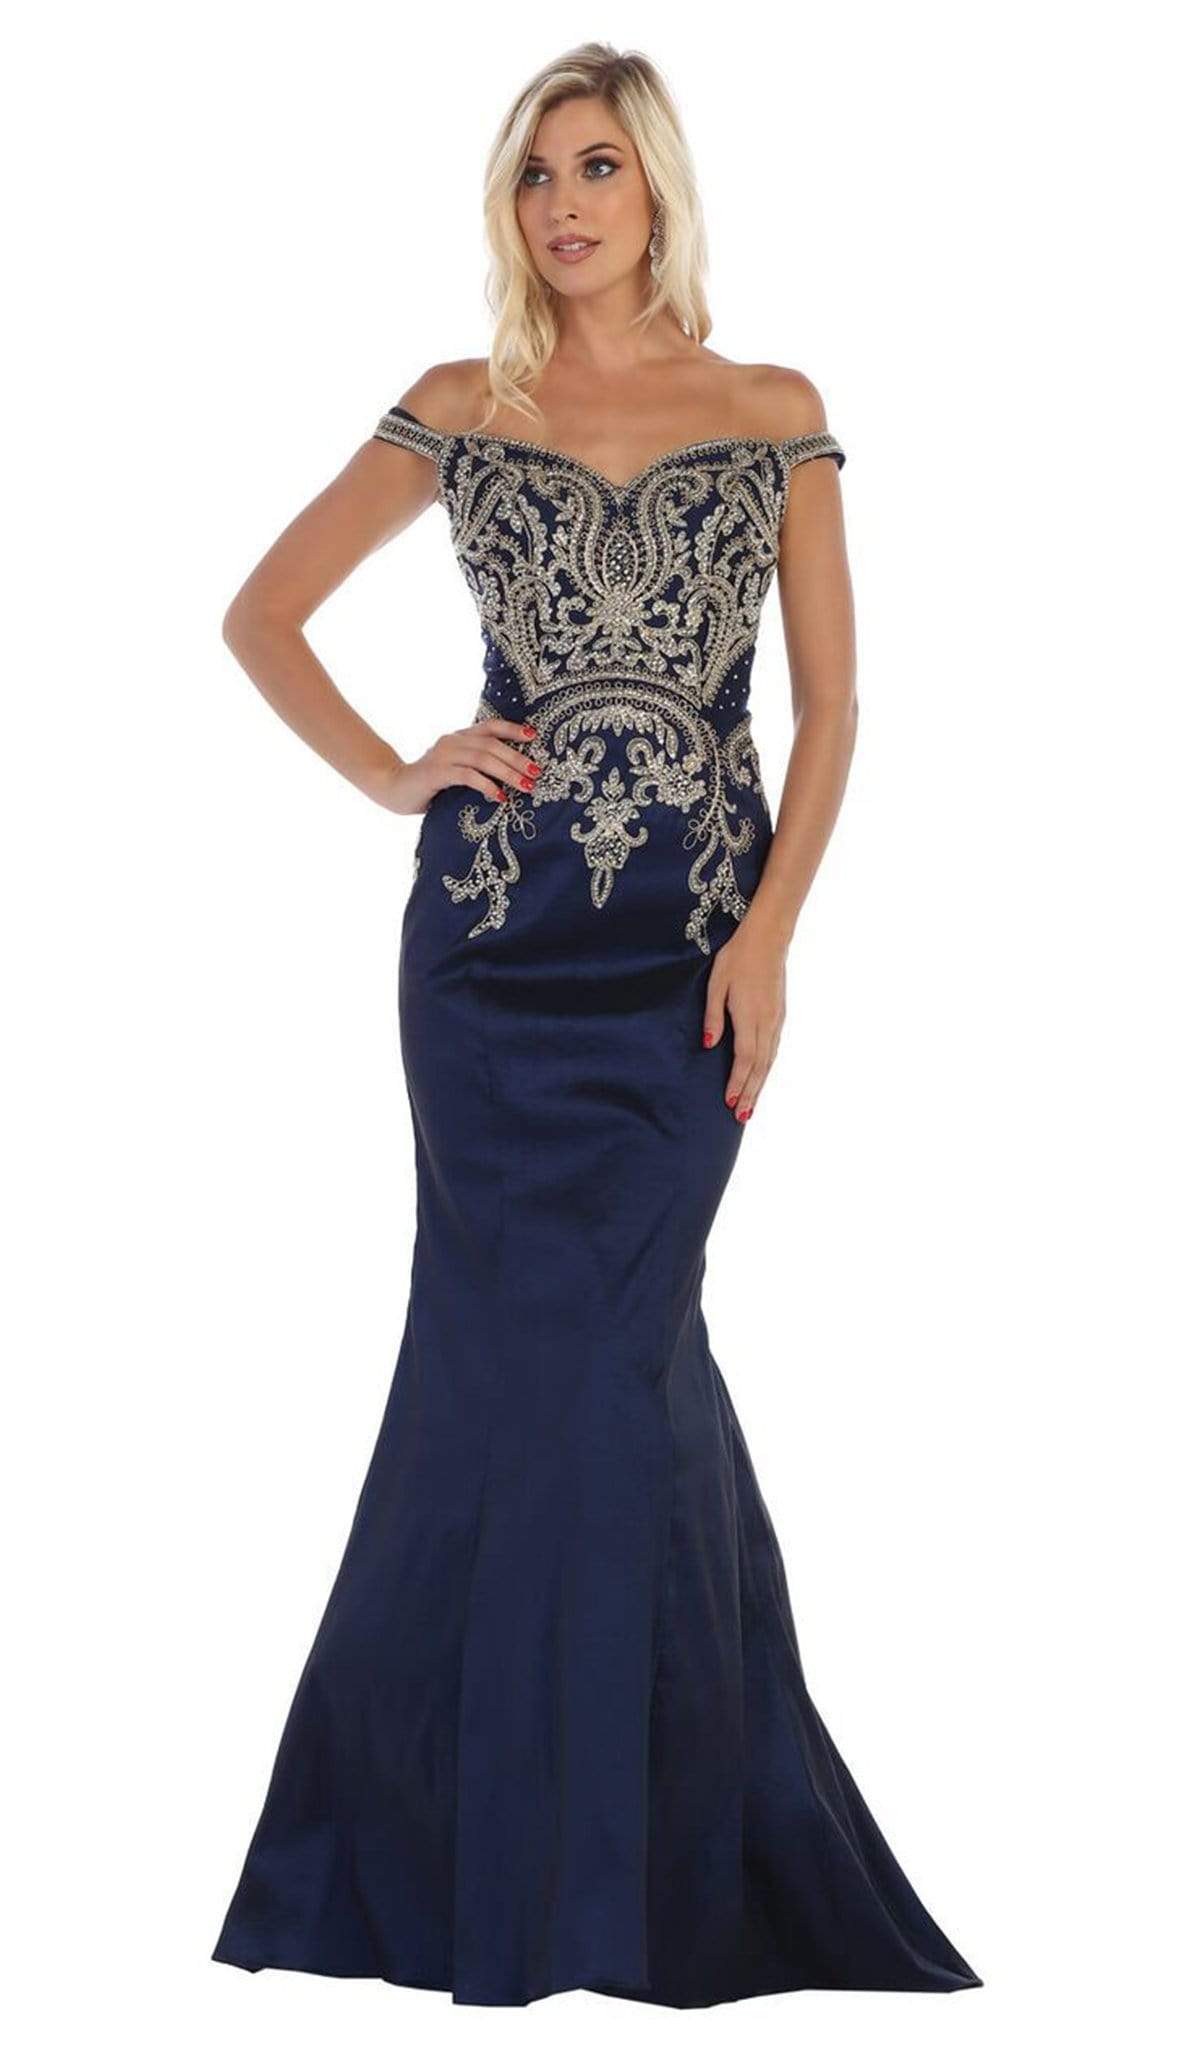 May Queen - MQ1609 Metallic Lace Appliqued Trumpet Gown Bridesmaid Dresses 4 / Navy